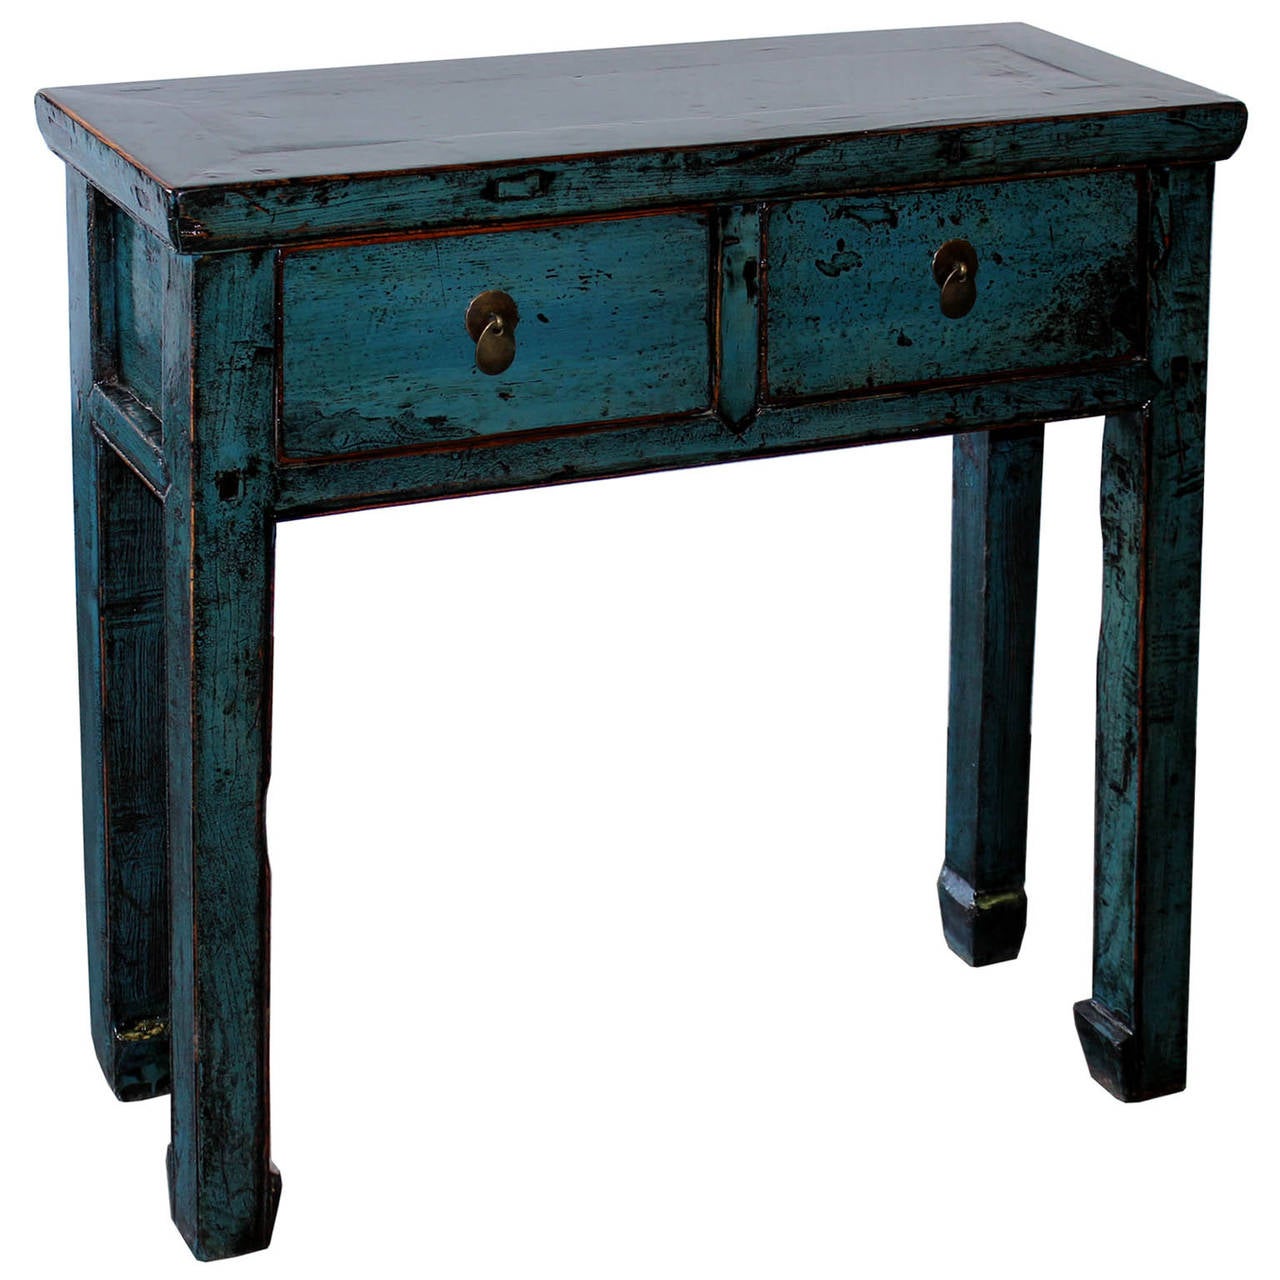 Small 2-drawer console table with exposed wood edges and horse-hoof feet can be placed in a hallway or entry way with a lamp and accessories on top. New hardware.